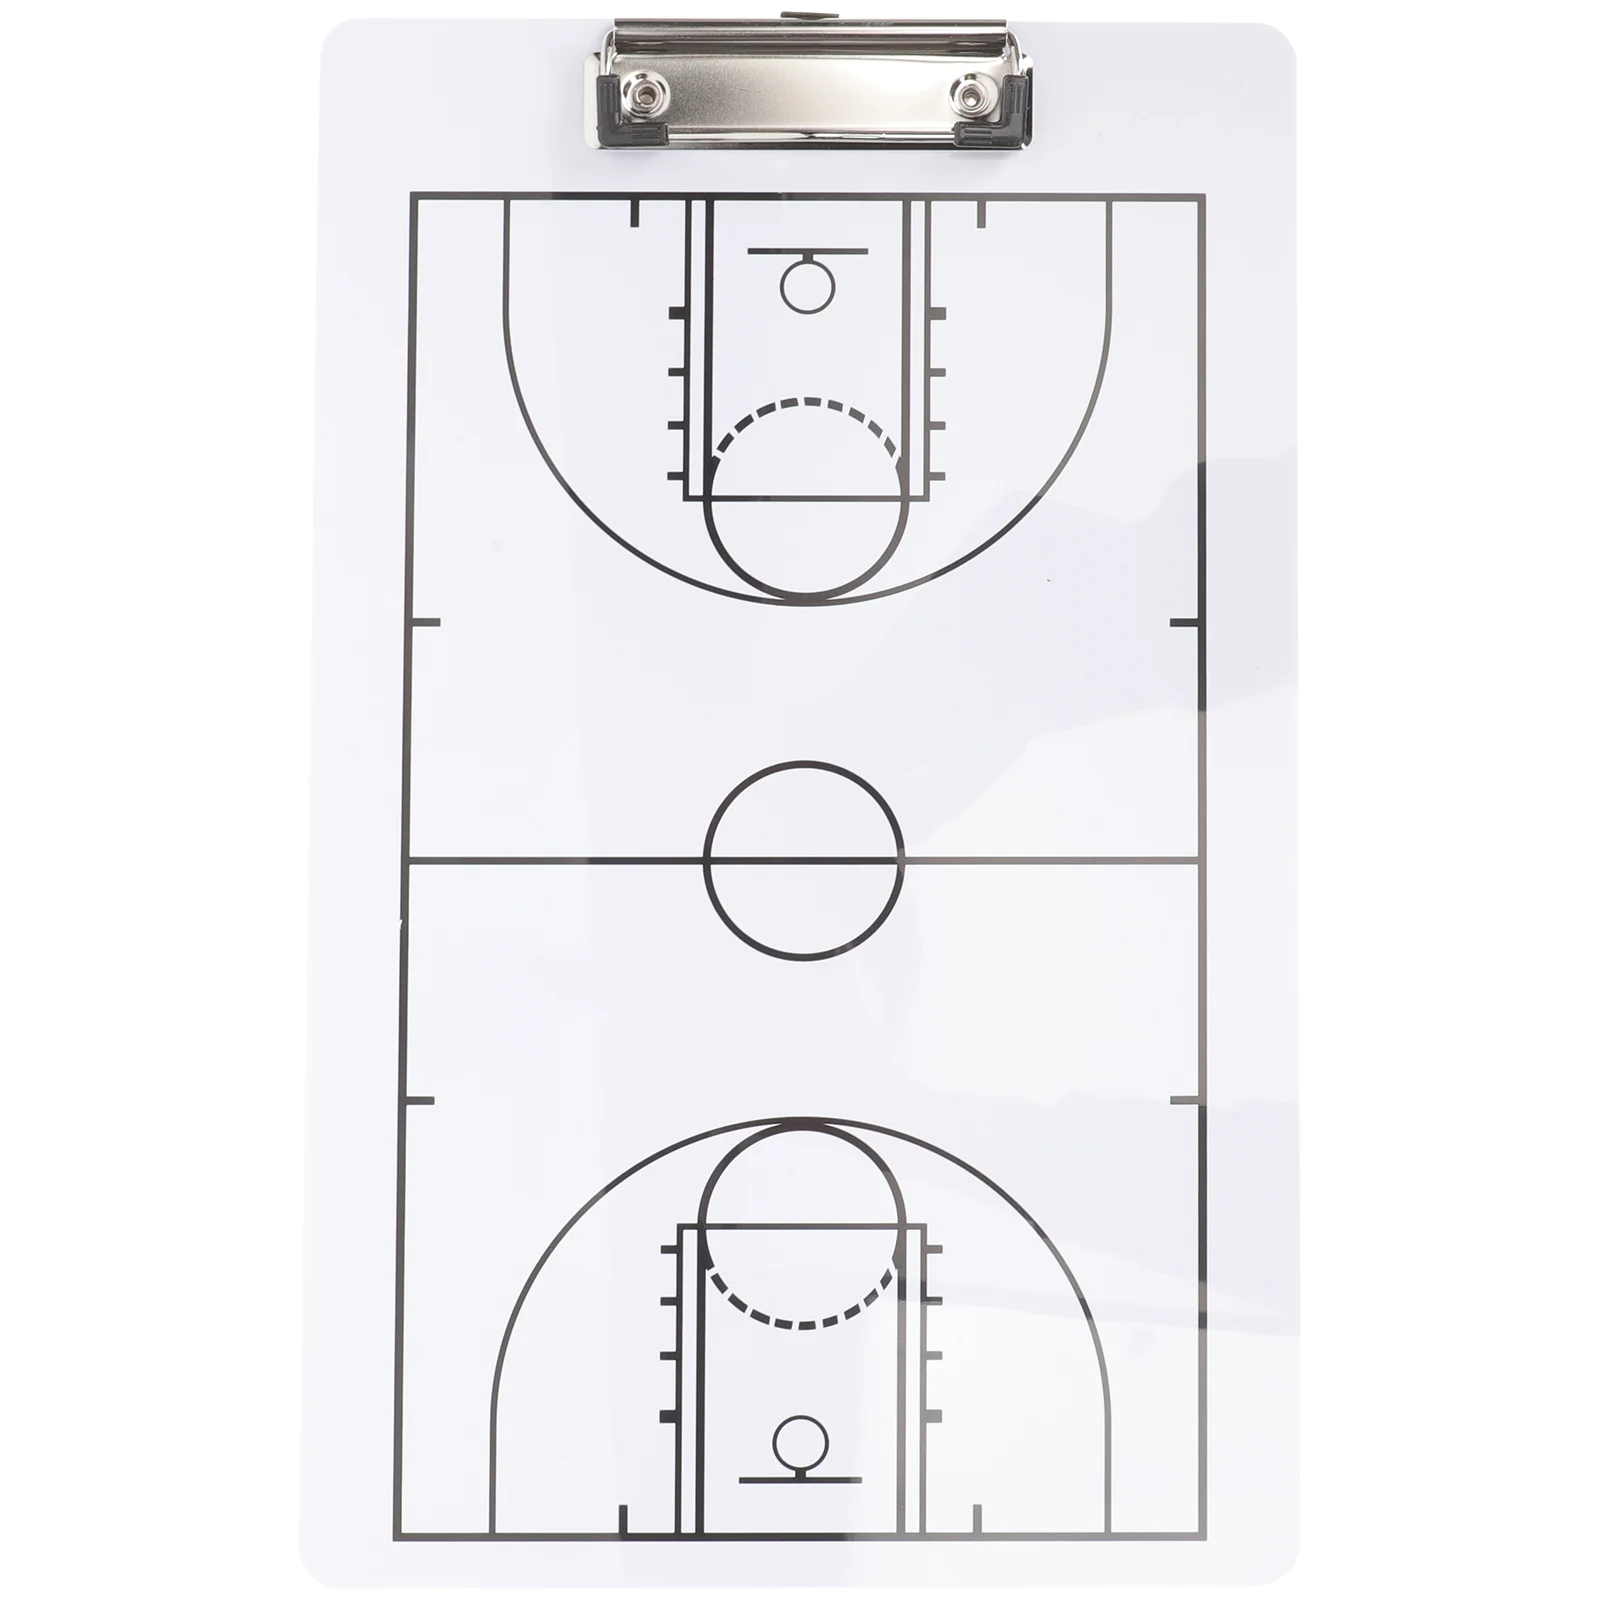 

Basketball Board Writing Match Drainage Whiteboard Pvc Reusable Competition Creative